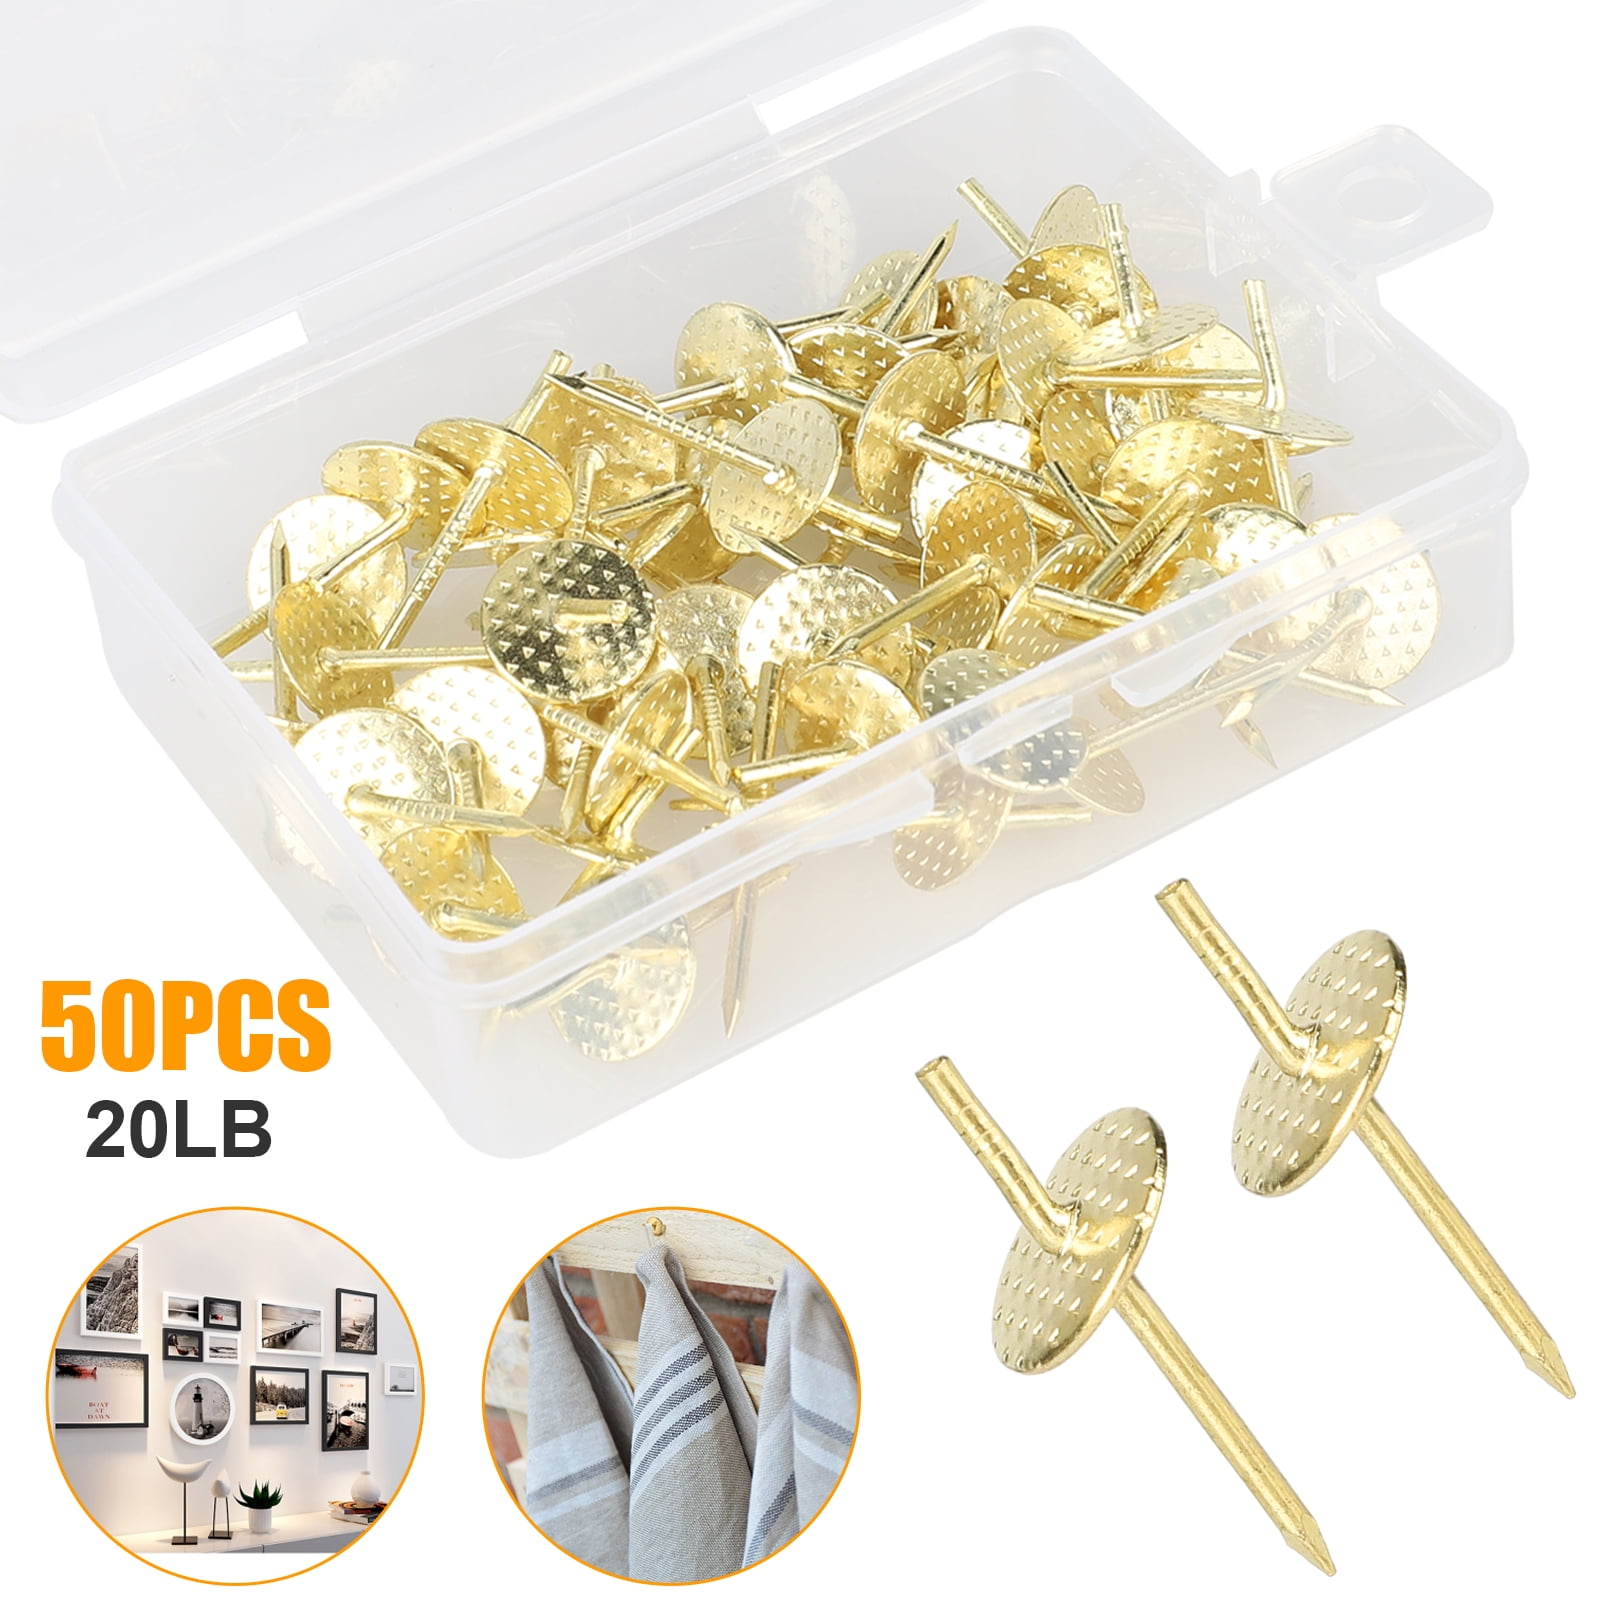 50Pcs Metal Picture Hangers Nails Photo Frame Hanging Wall Mount Hooks Kit 20lbs 